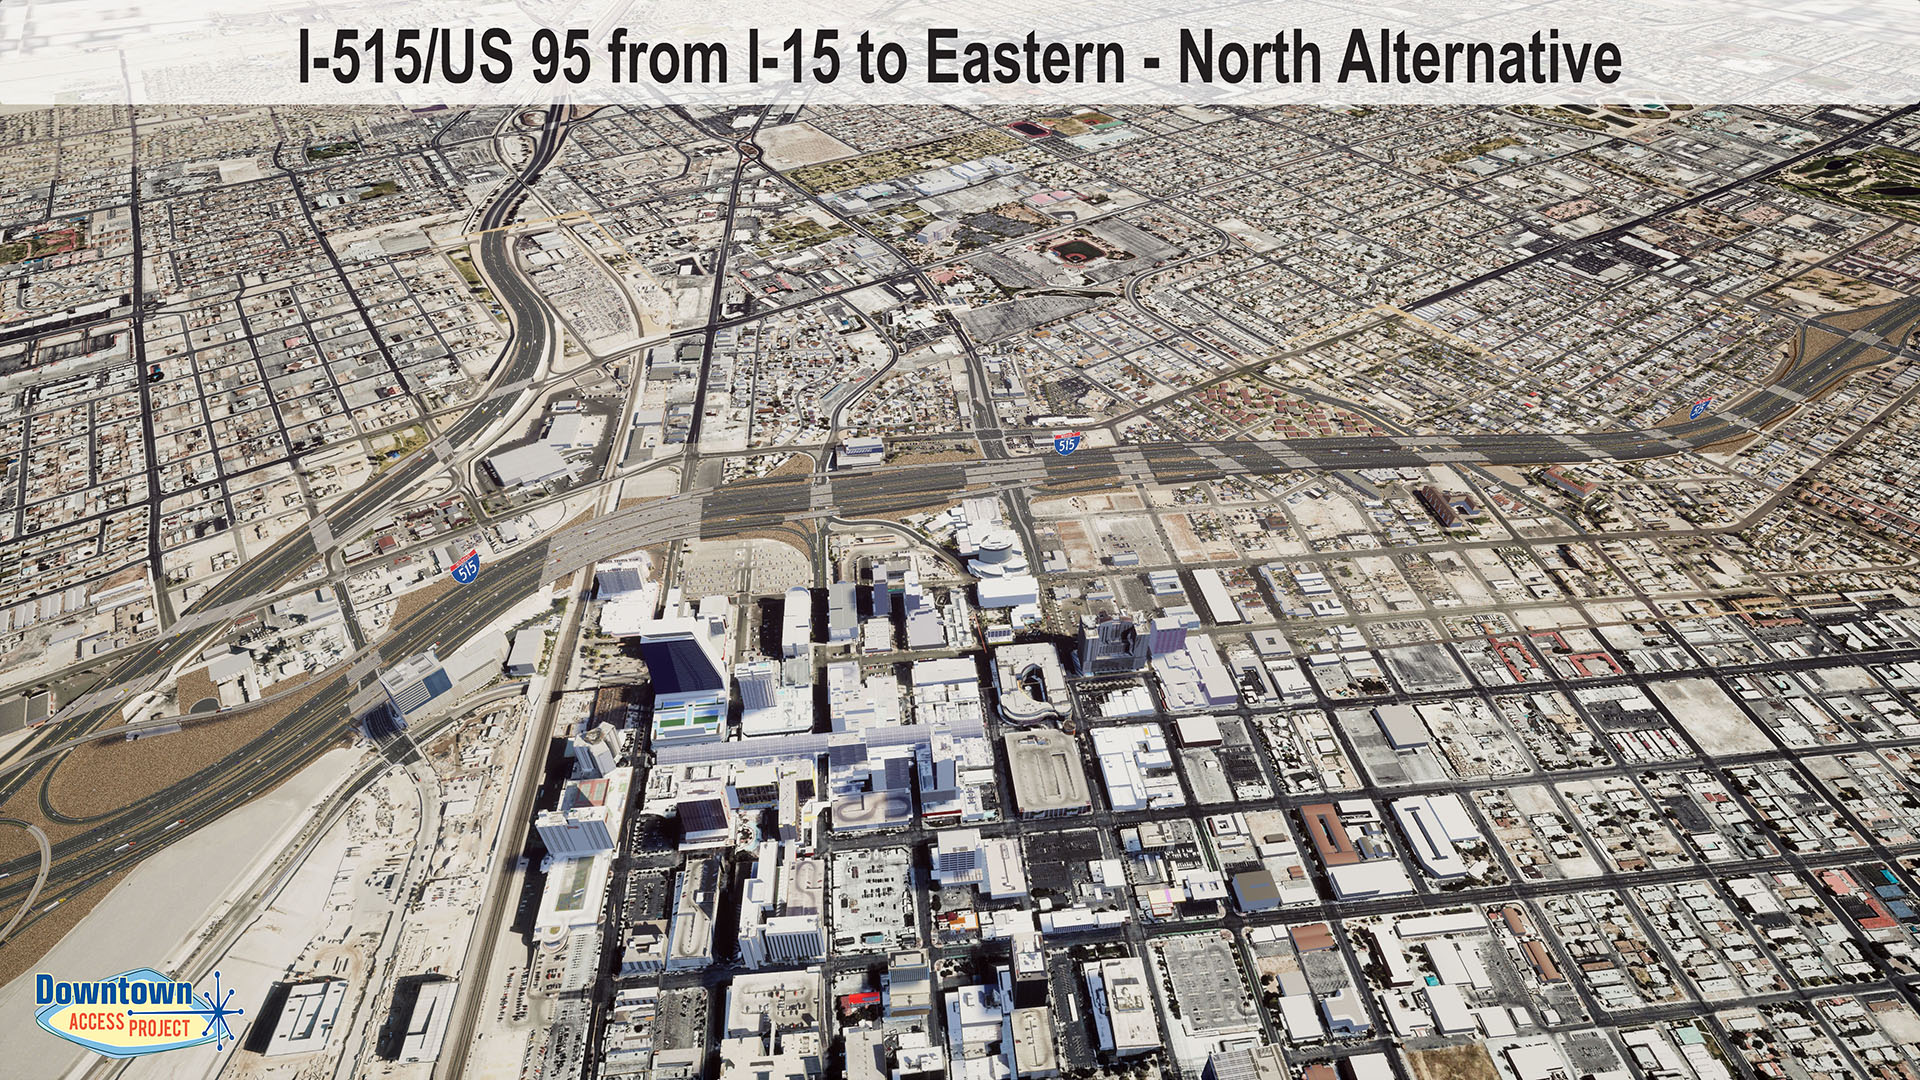 I-515/US 95 for I-15 to Eastern - North Alternative